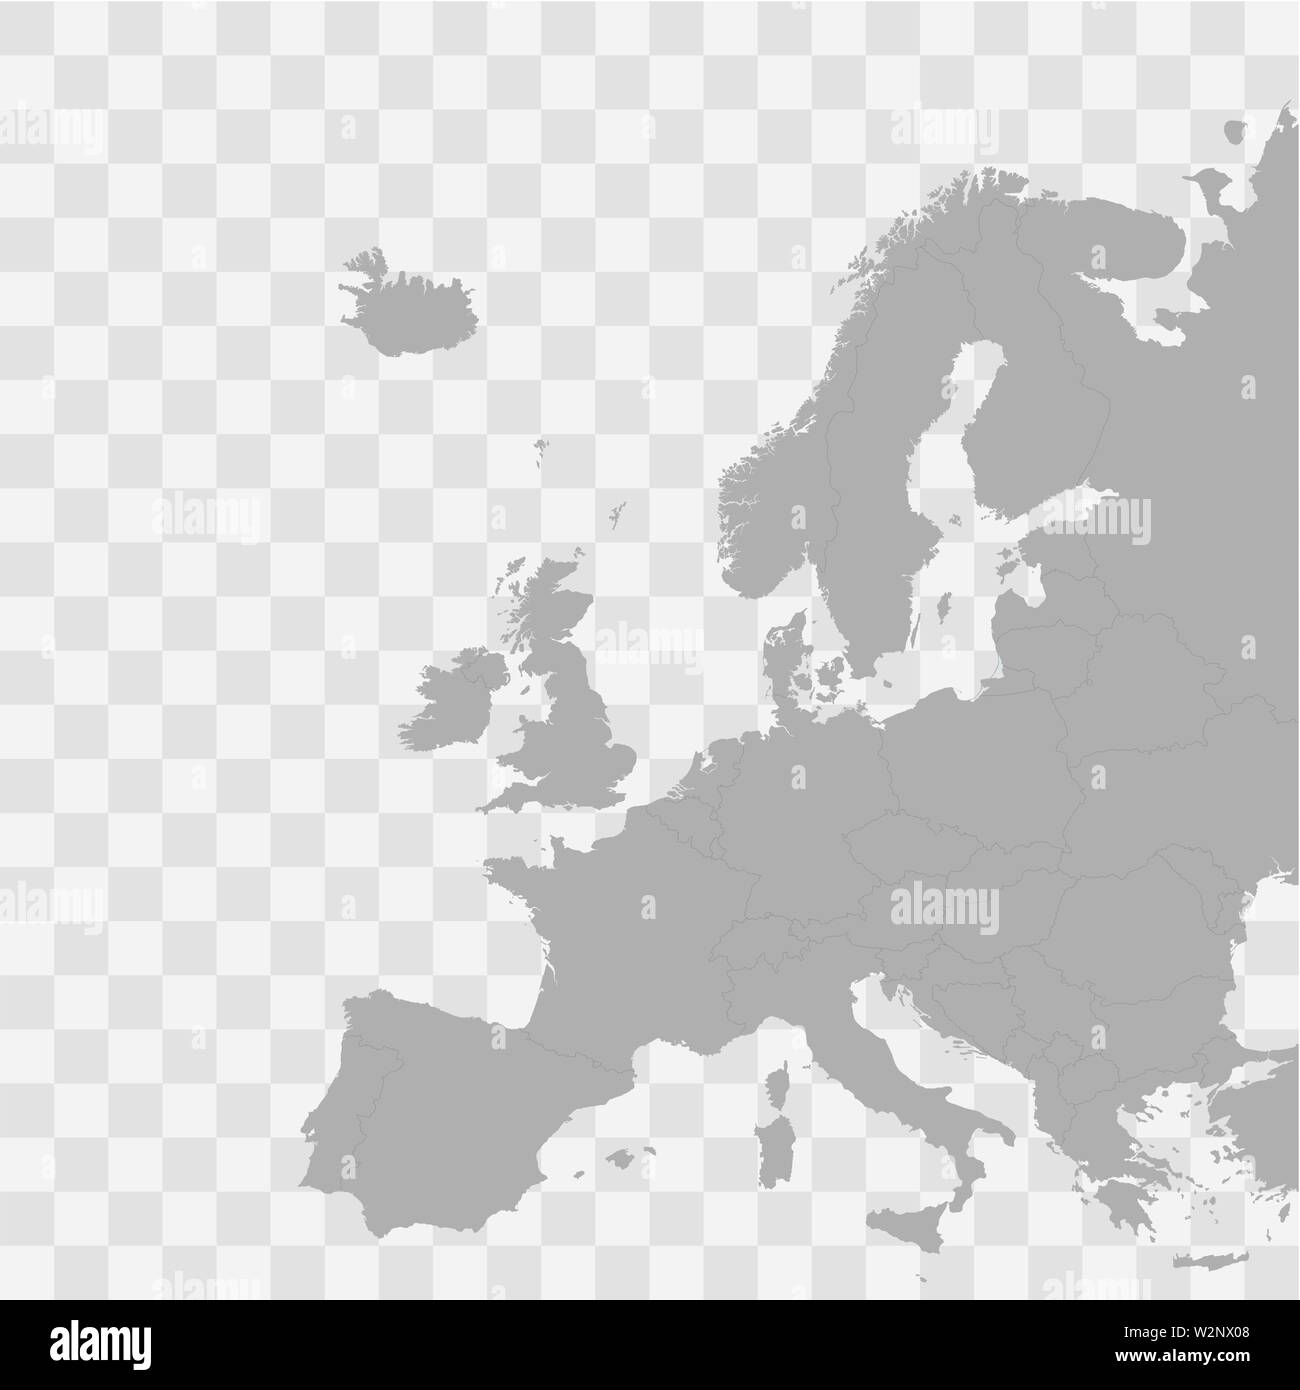 Europe vector map isolated on white back Stock Vector